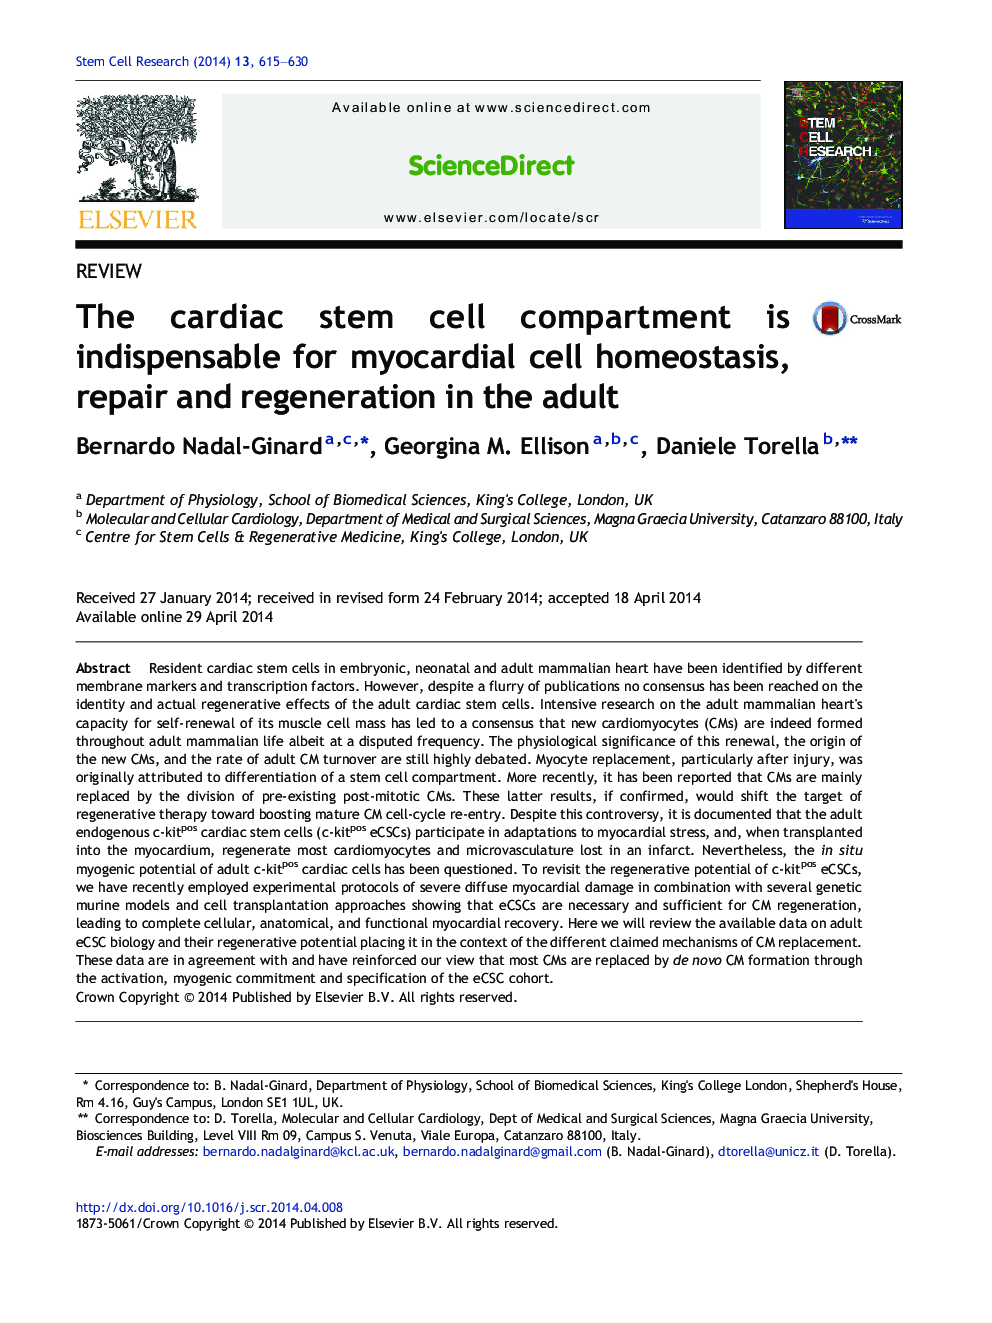 The cardiac stem cell compartment is indispensable for myocardial cell homeostasis, repair and regeneration in the adult